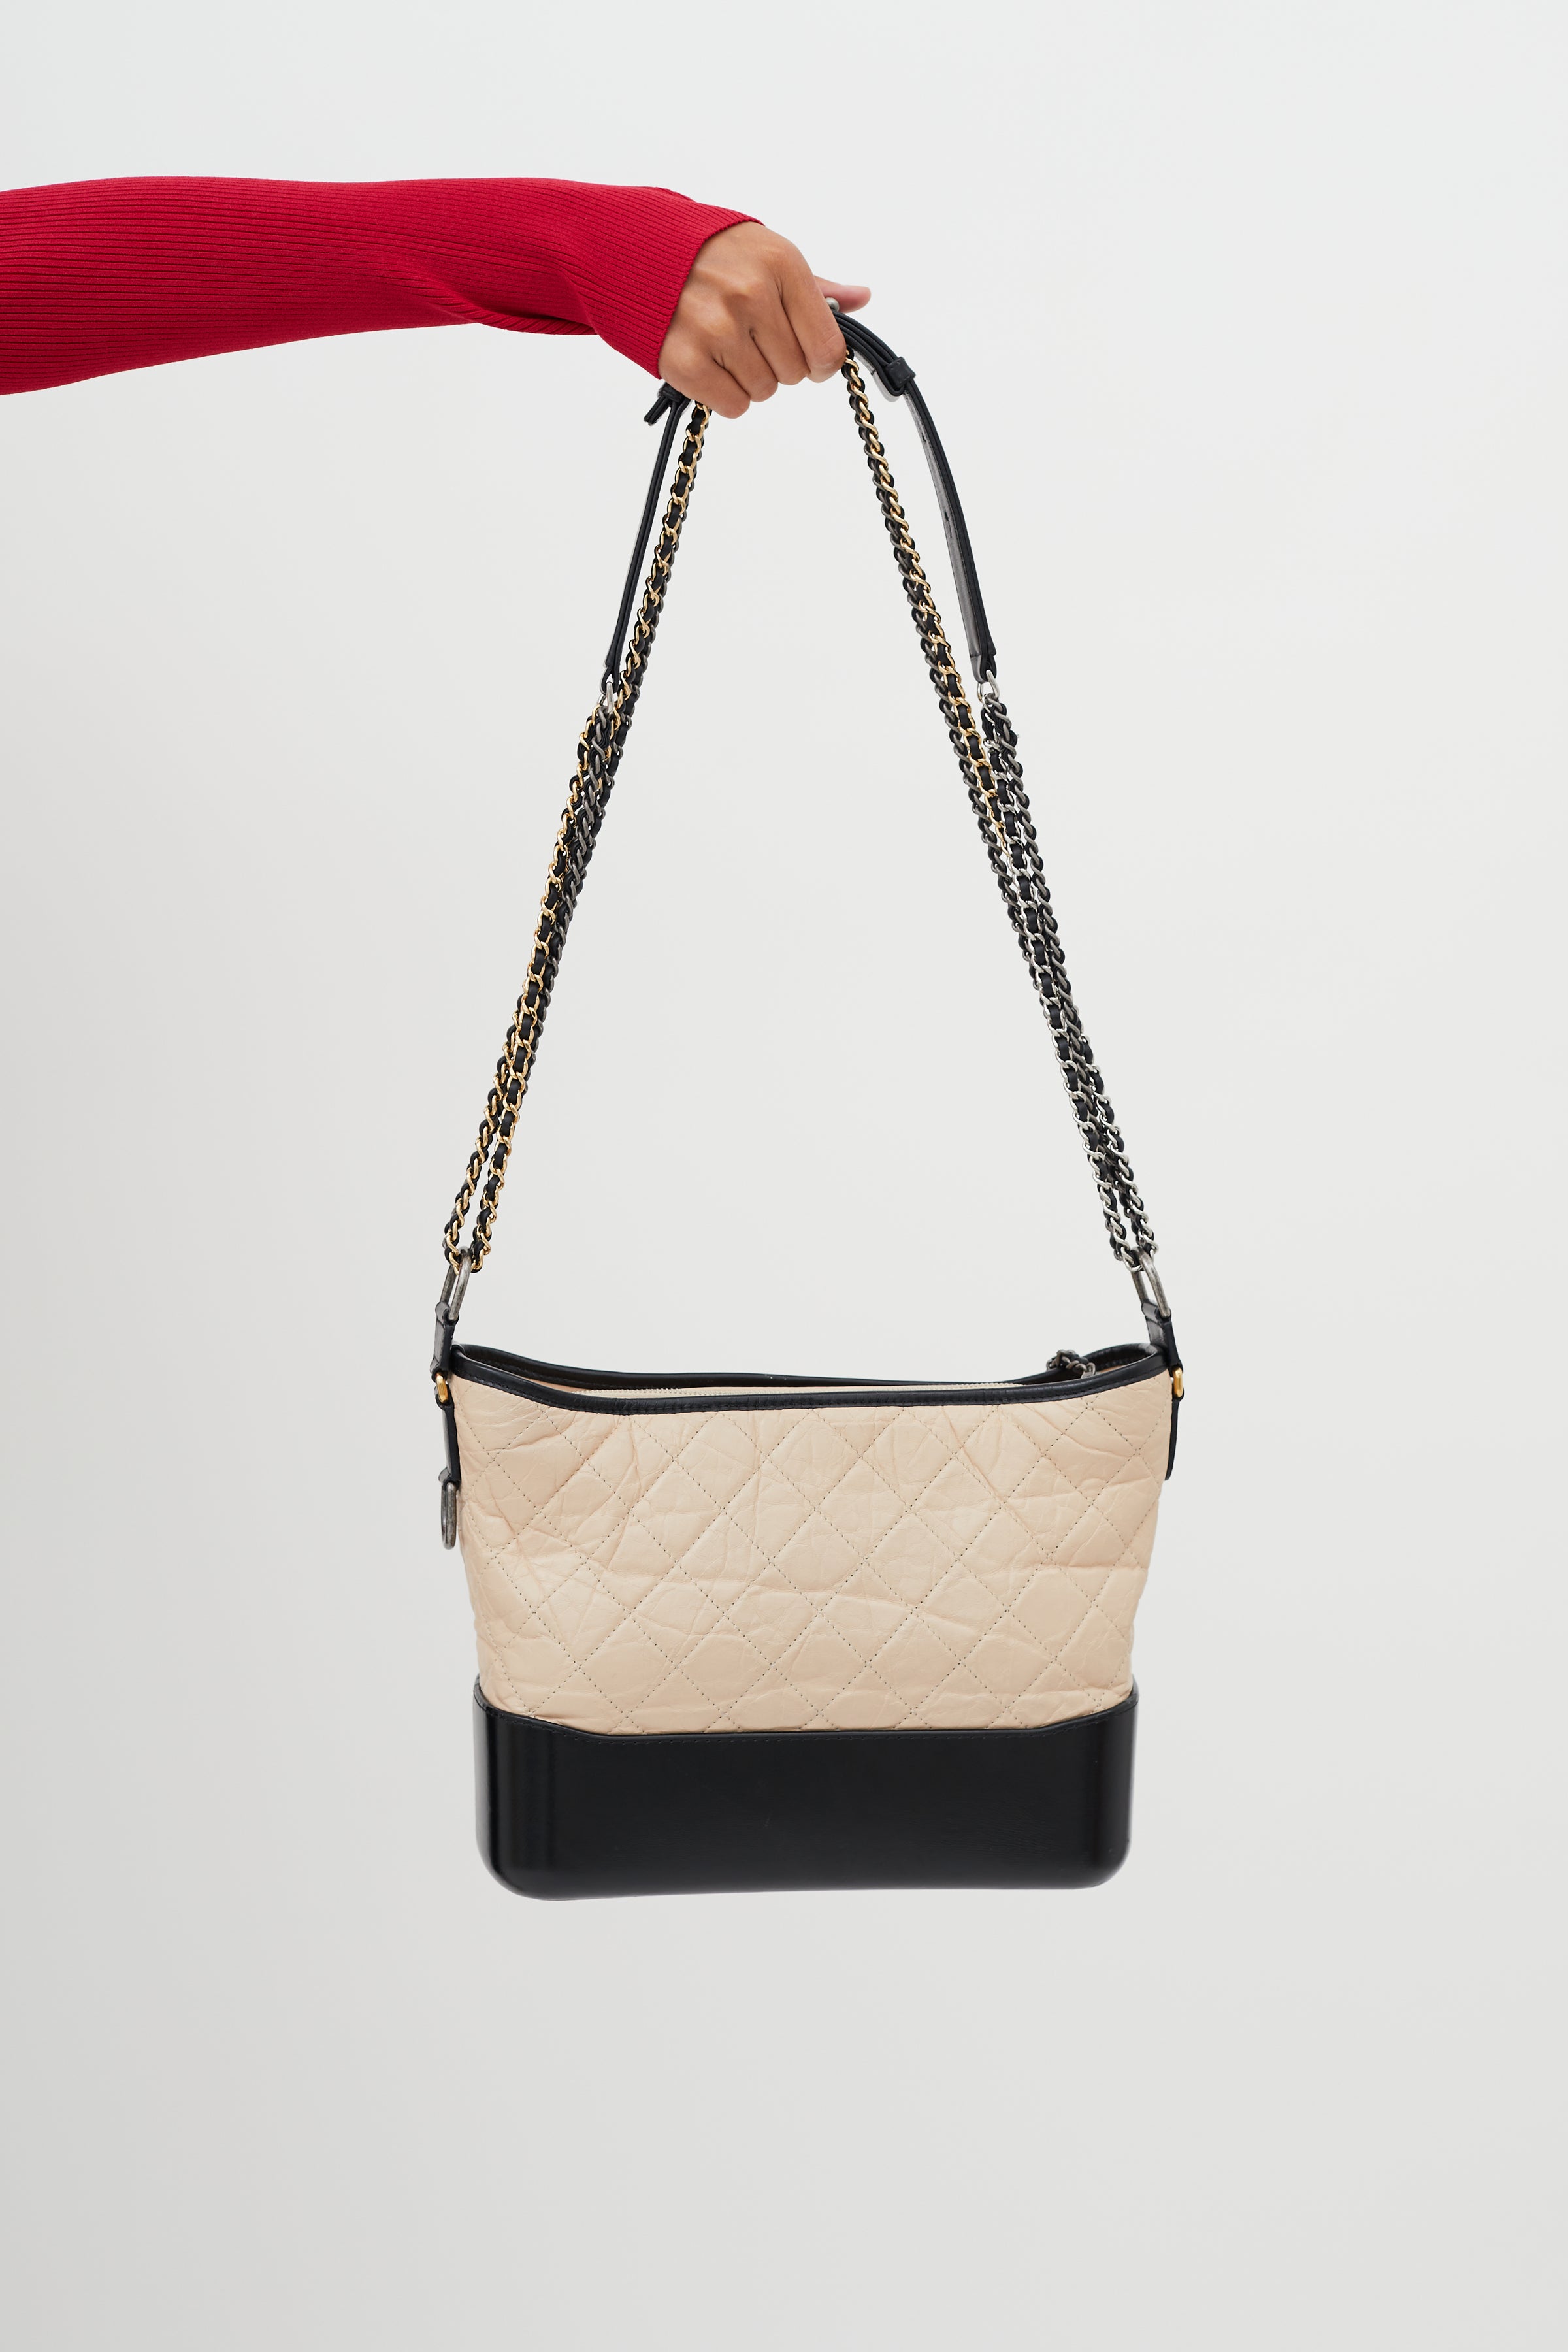 Chanel Black/Beige Quilted Leather Gabrielle Medium Hobo Bag - Yoogi's  Closet